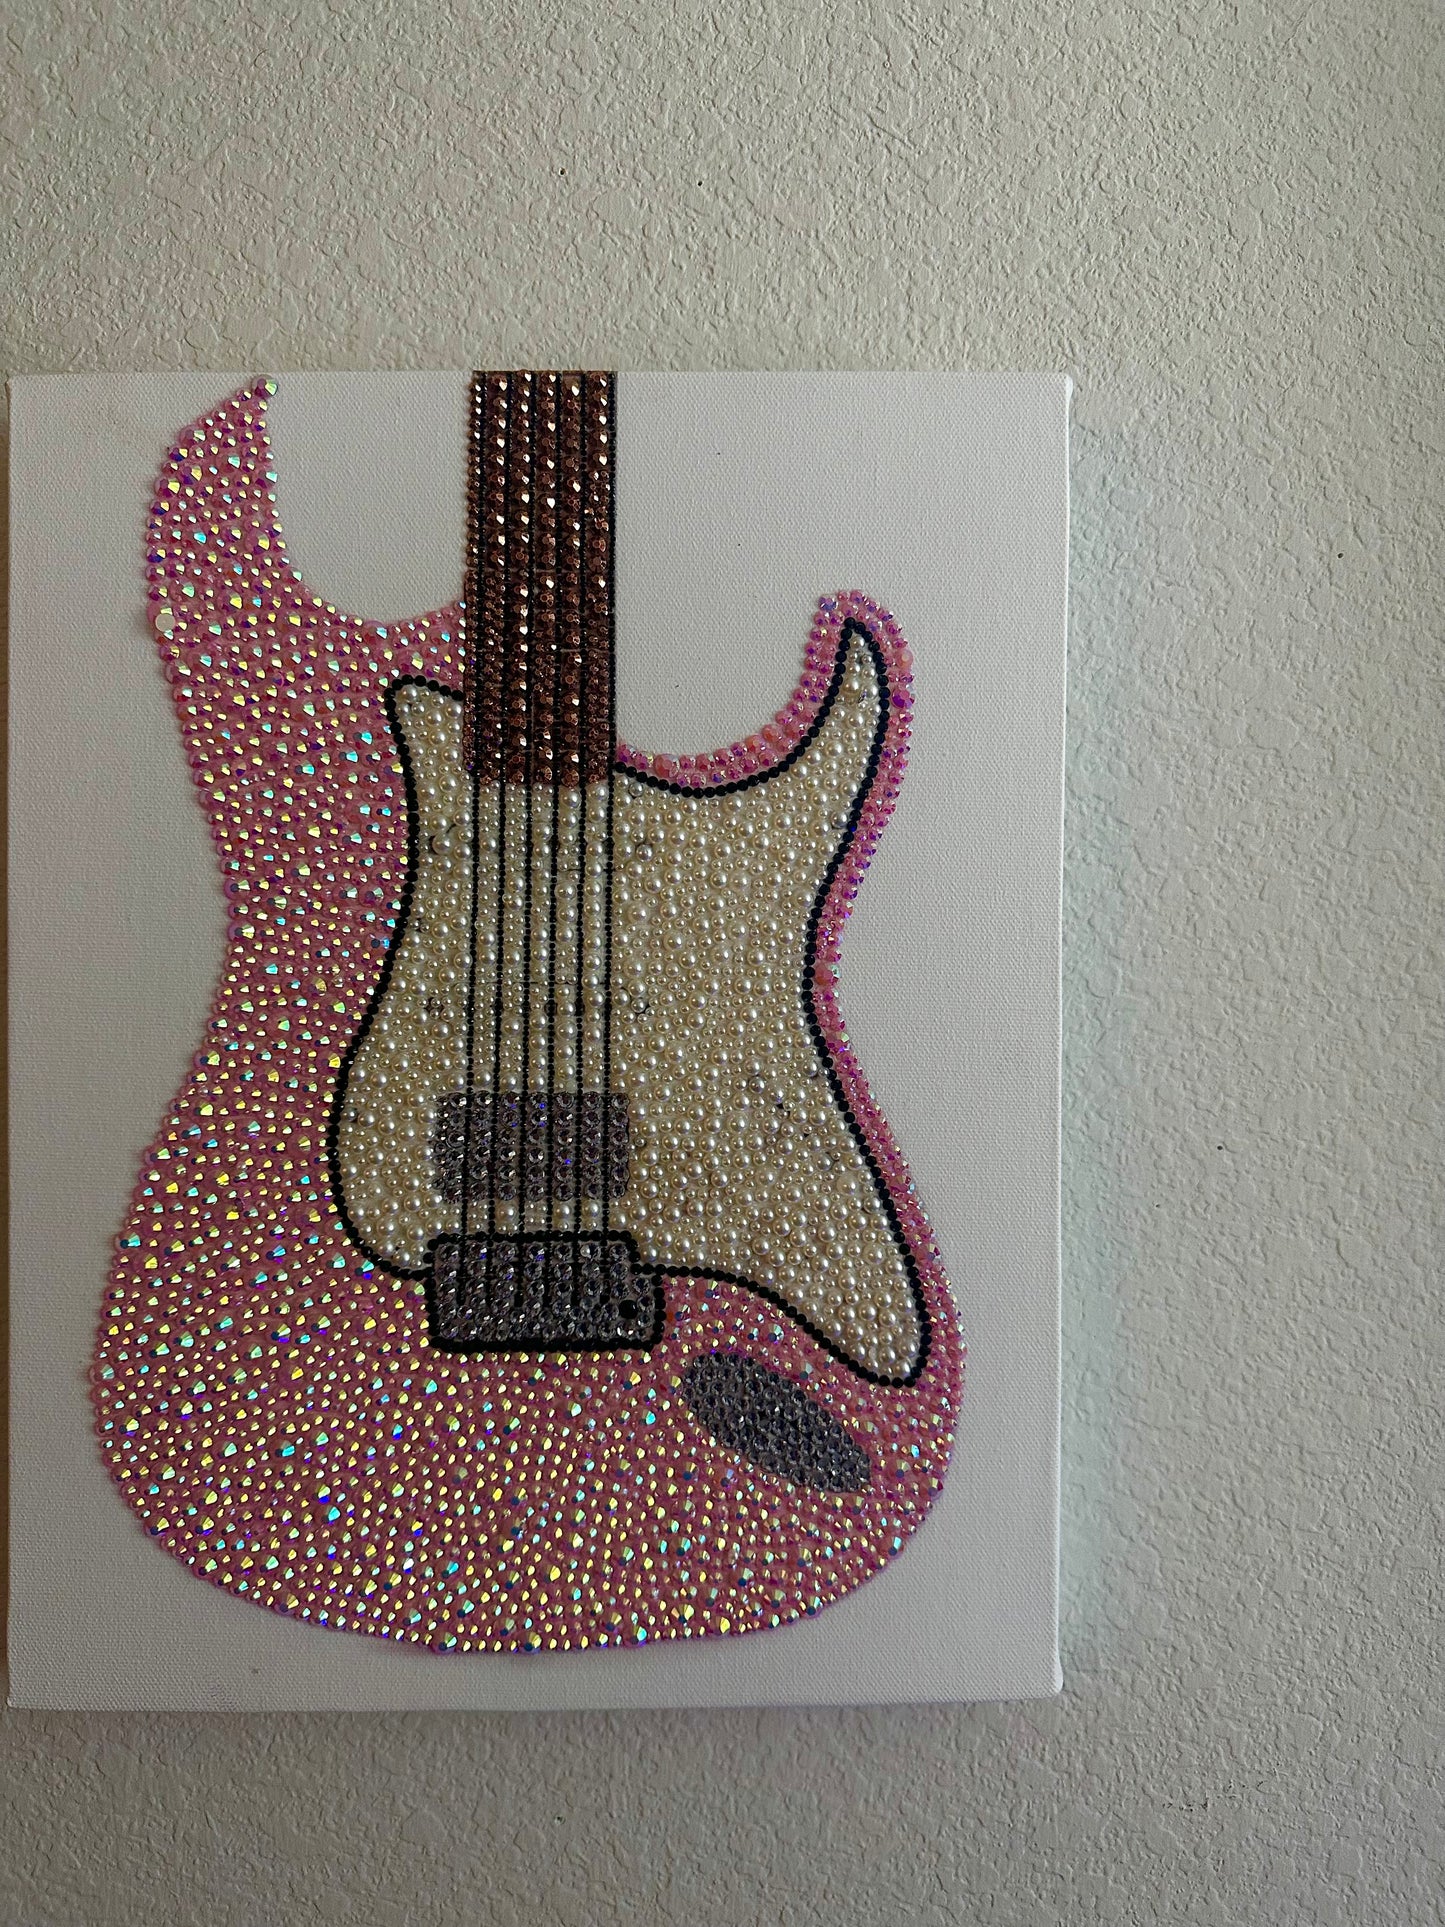 Pink guitar PRE DONE